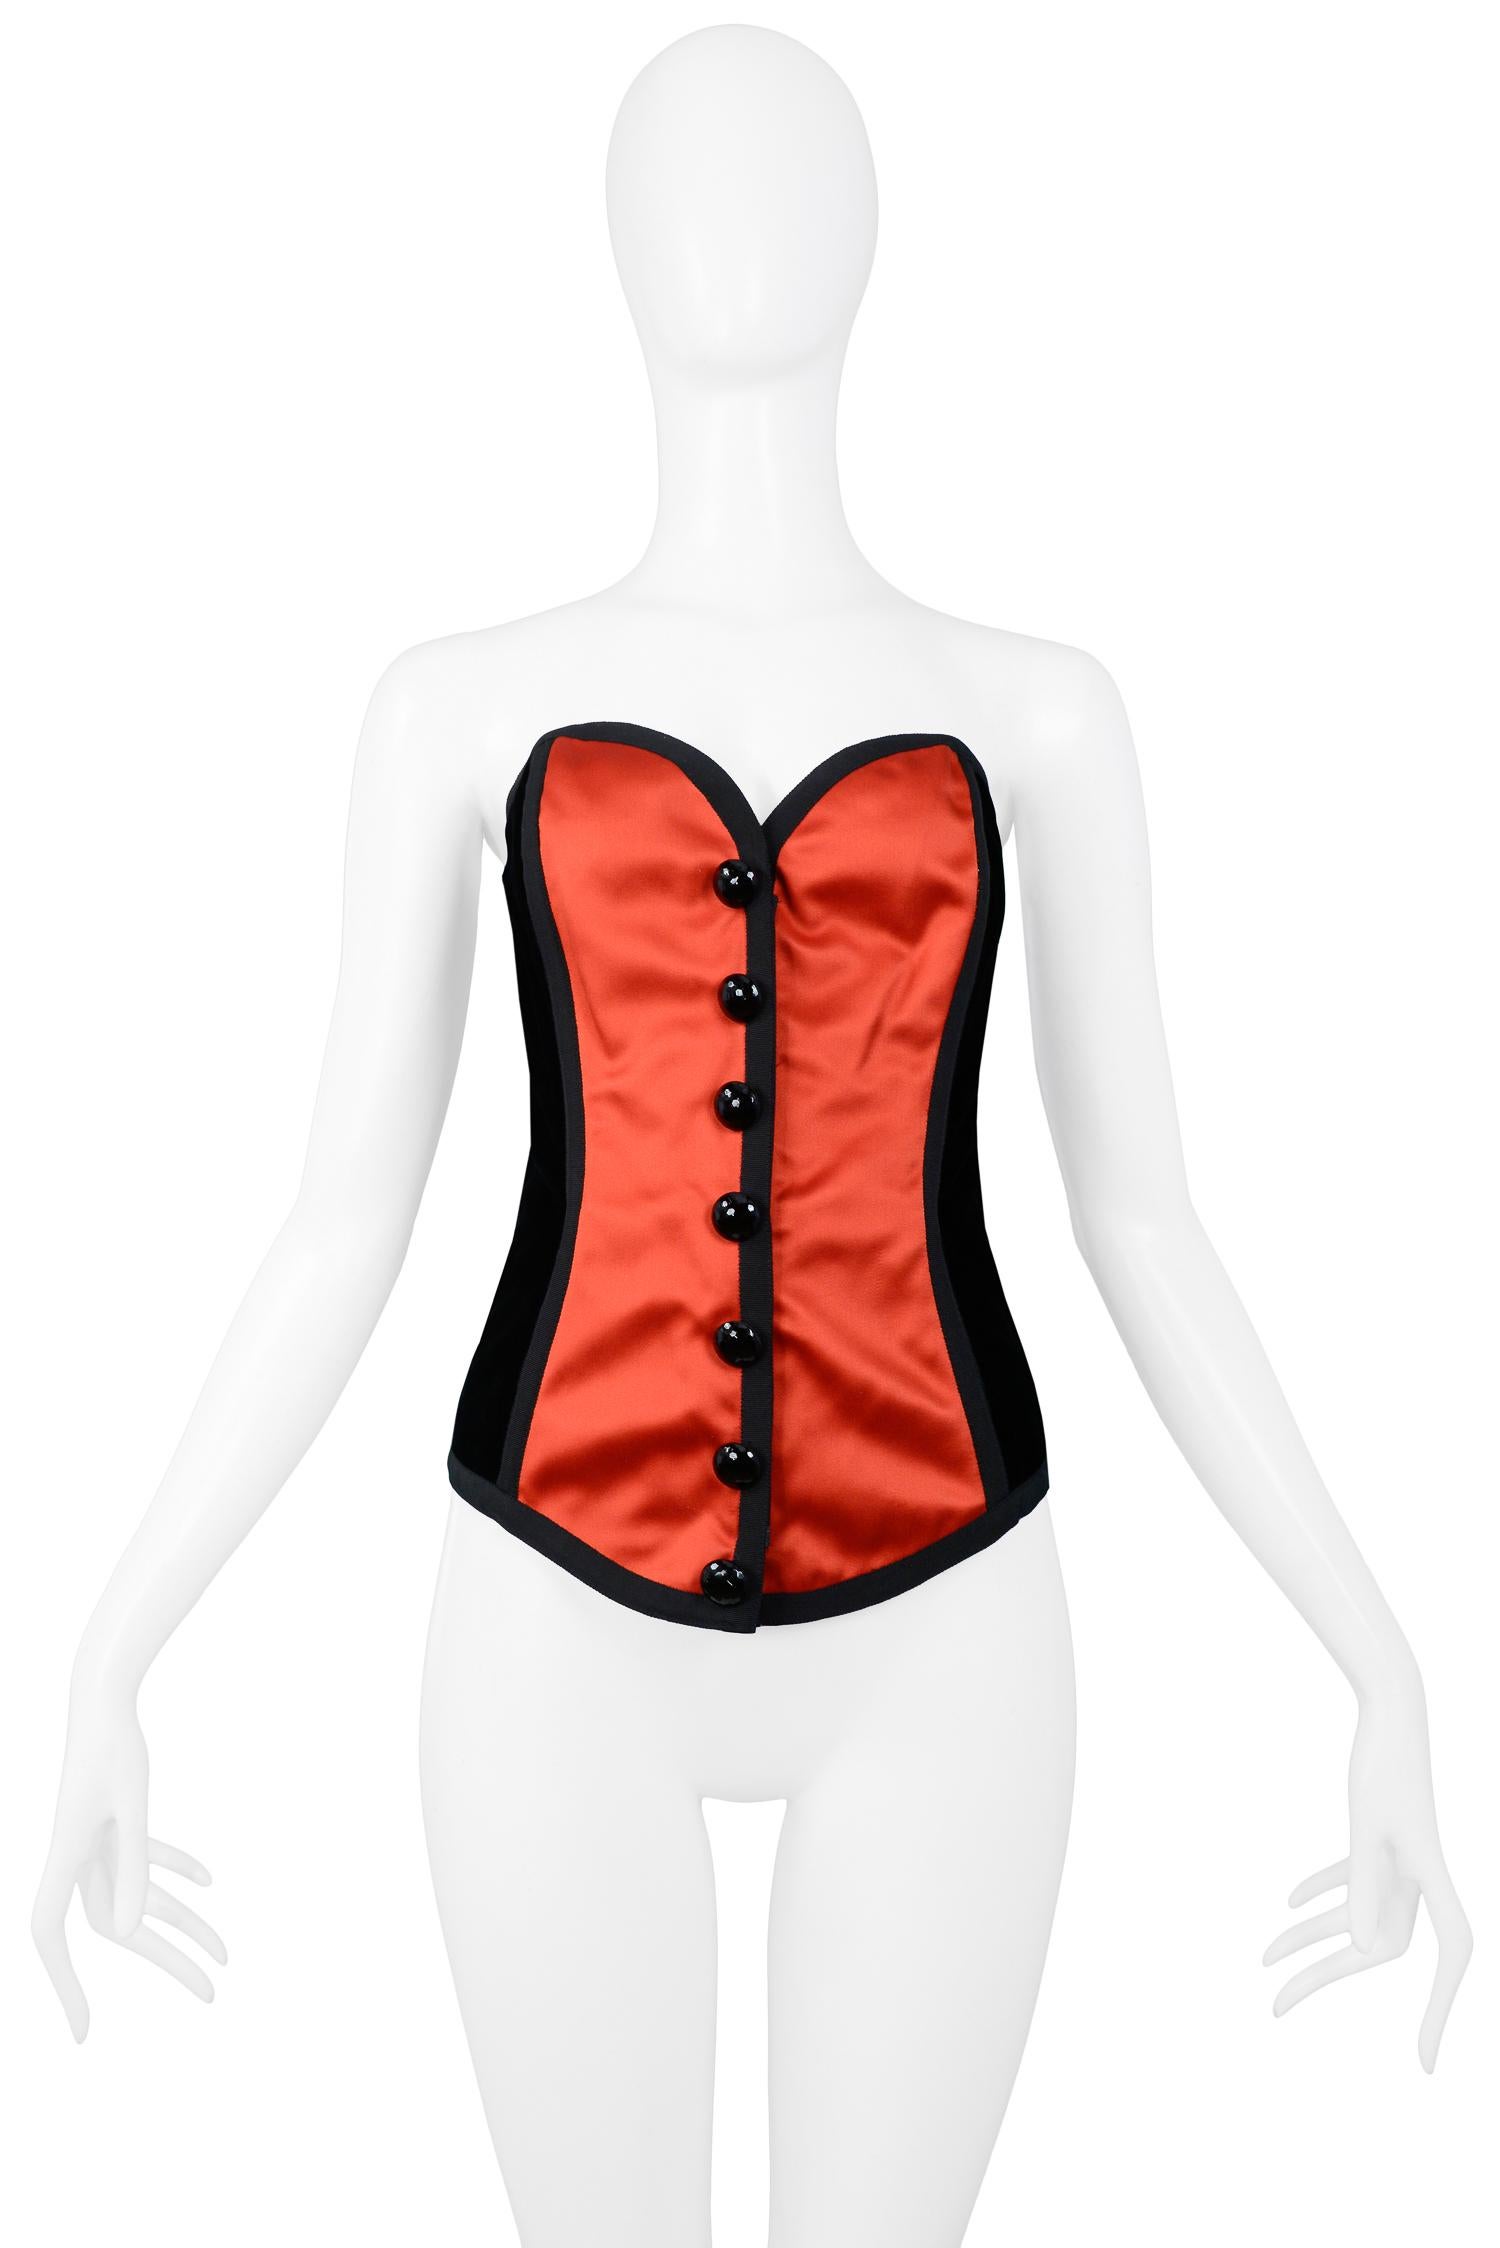 Vintage Yves Saint Laurent red satin & black velvet bustier with decorative faceted button front. Bustier has some stretch for easy fit. 

Excellent Condition.

Size: 38